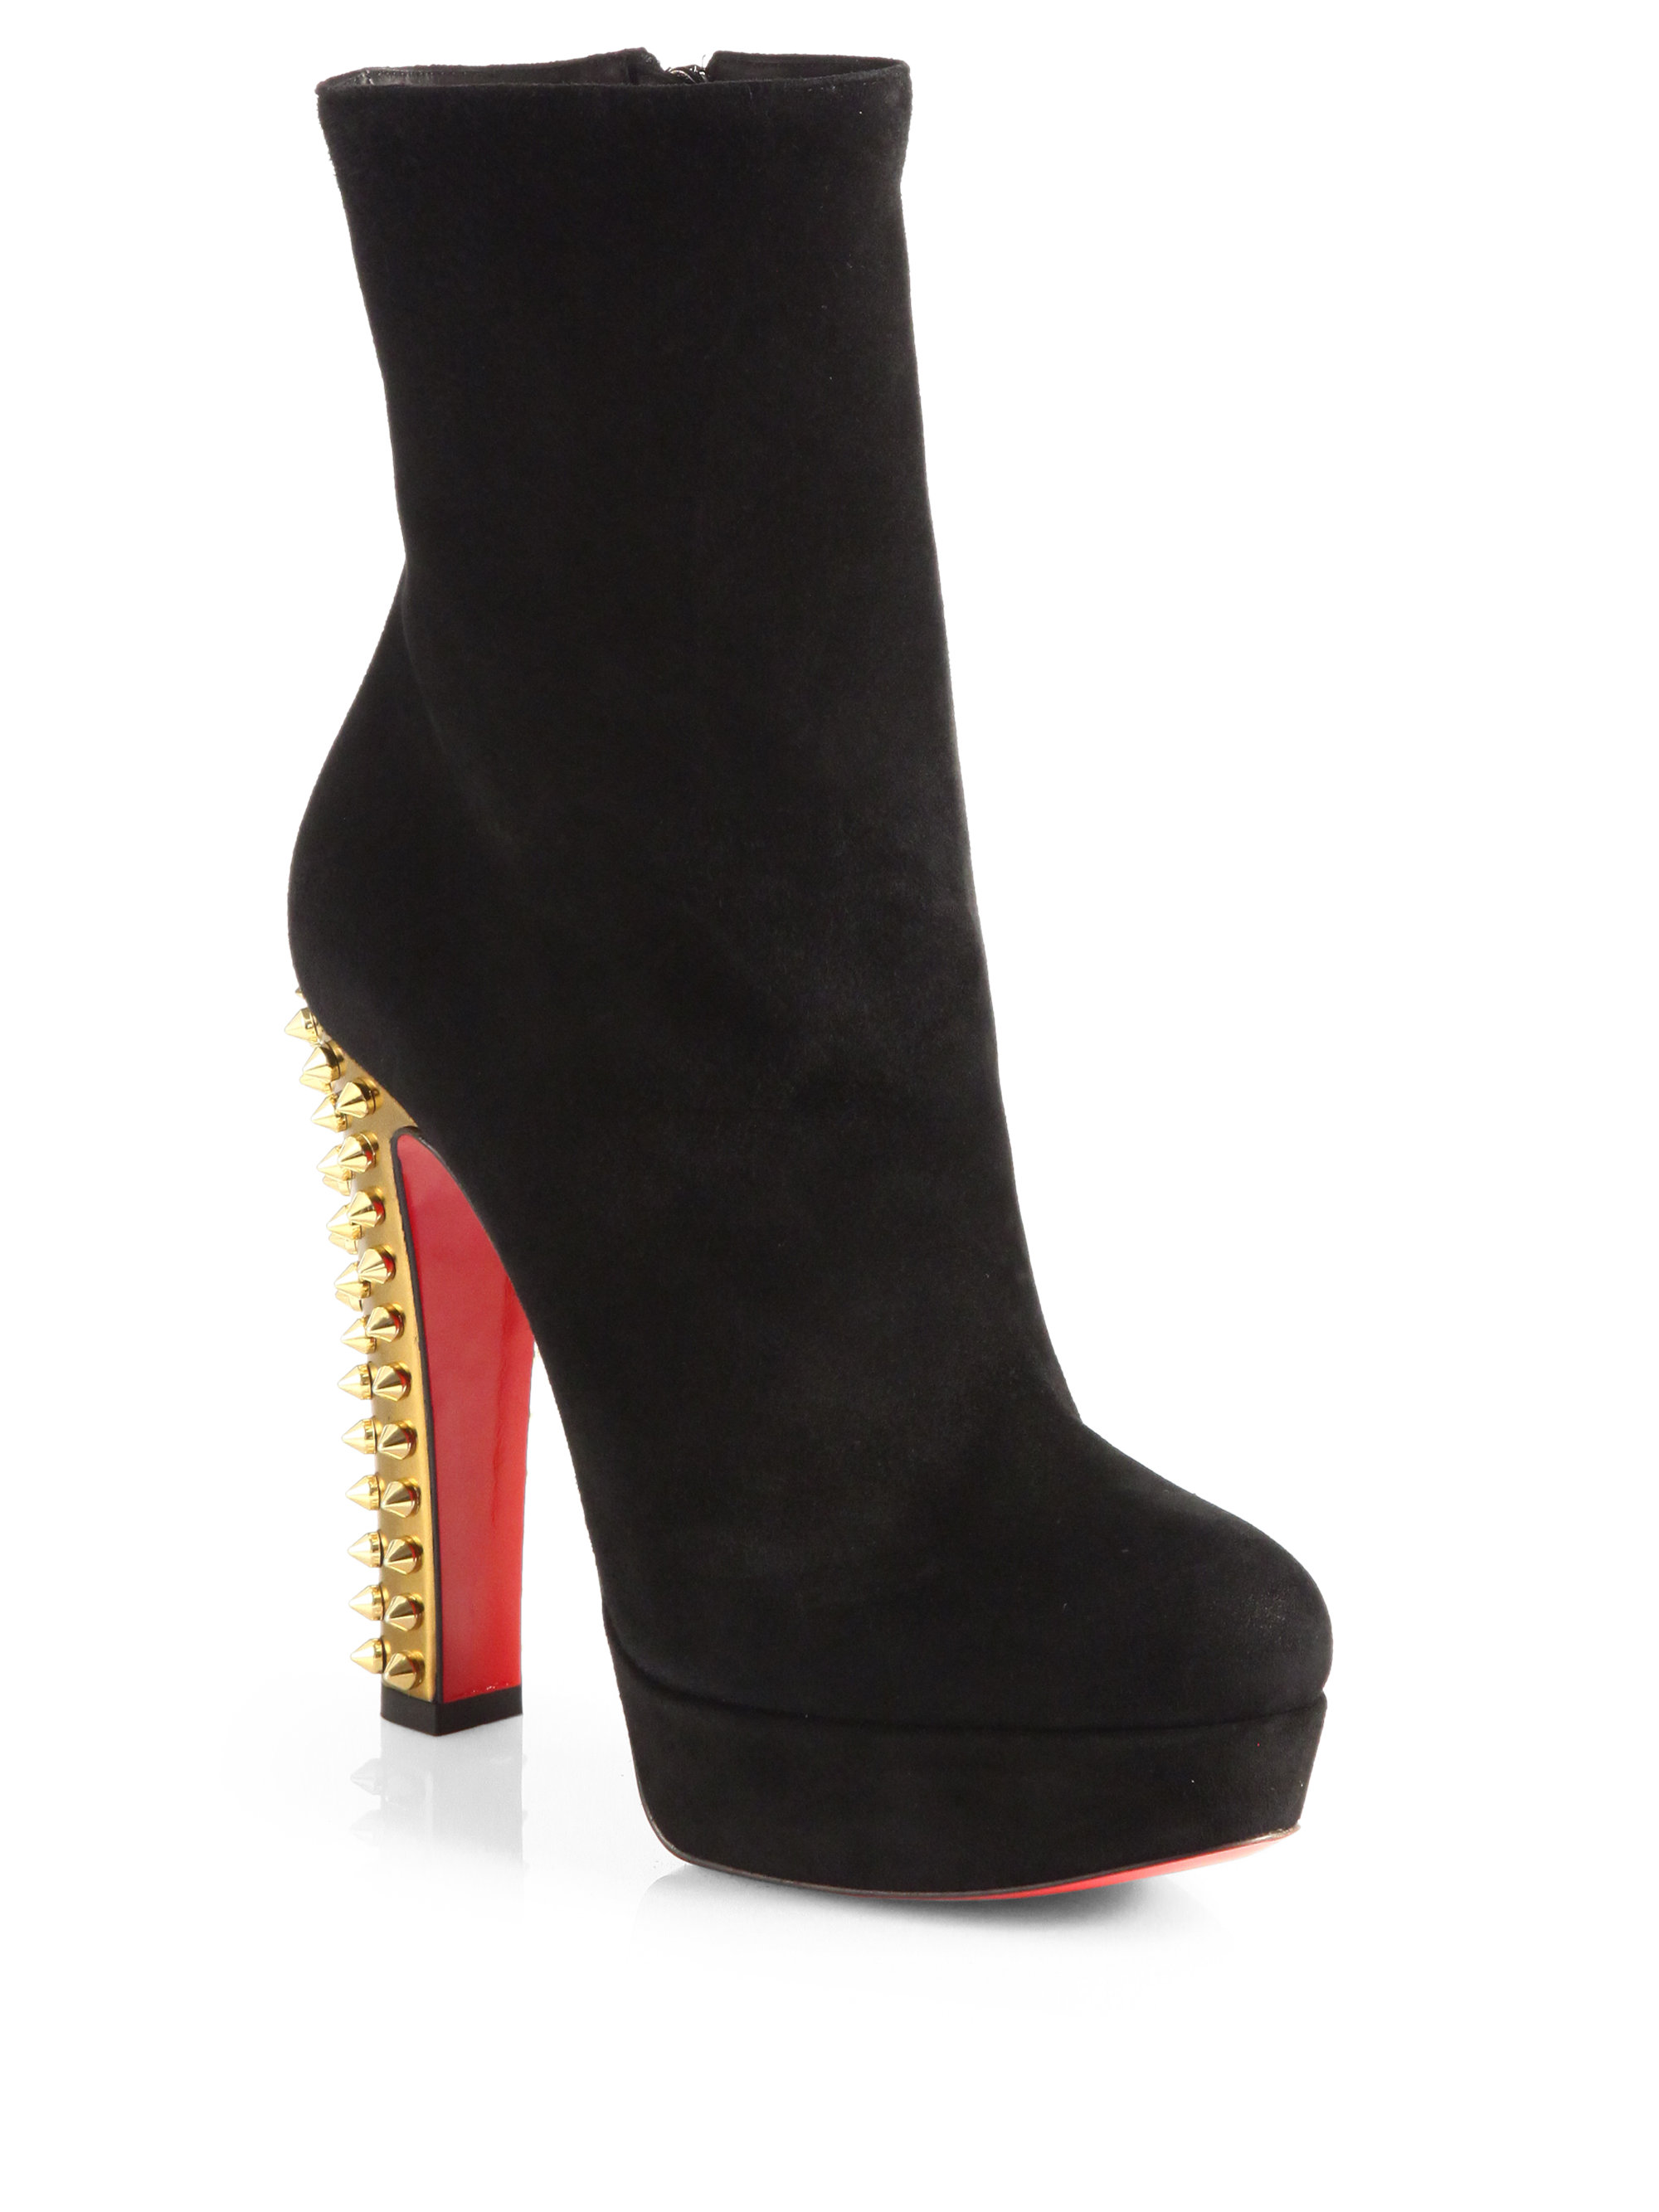 Christian Louboutin Taclou Suede Spiked Heel Midcalf Boots in Black - Lyst